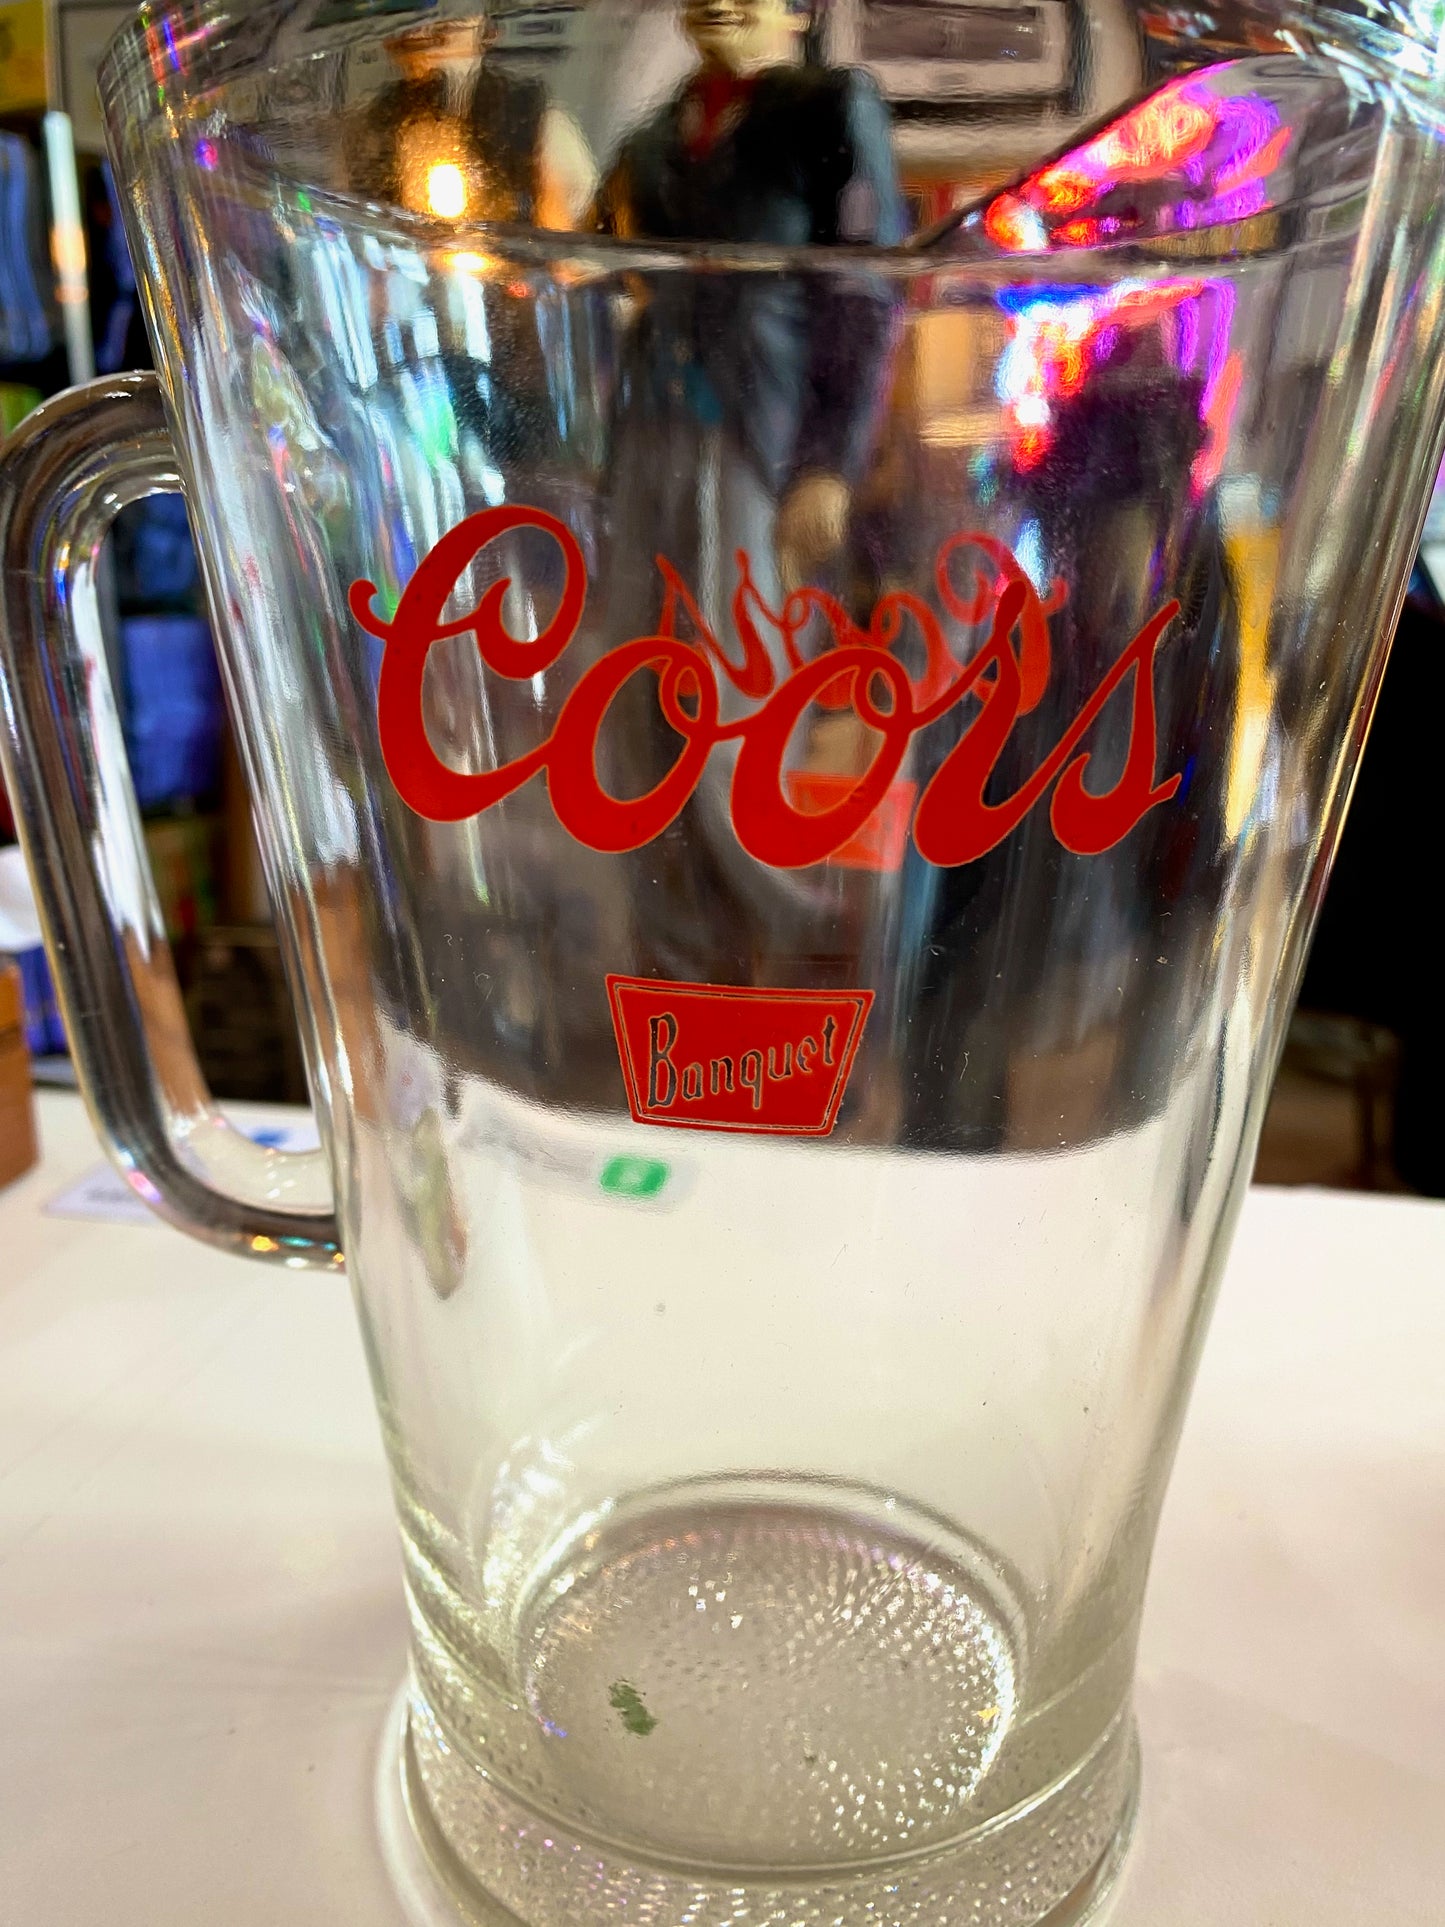 Vintage Style Coors Beer Pitcher